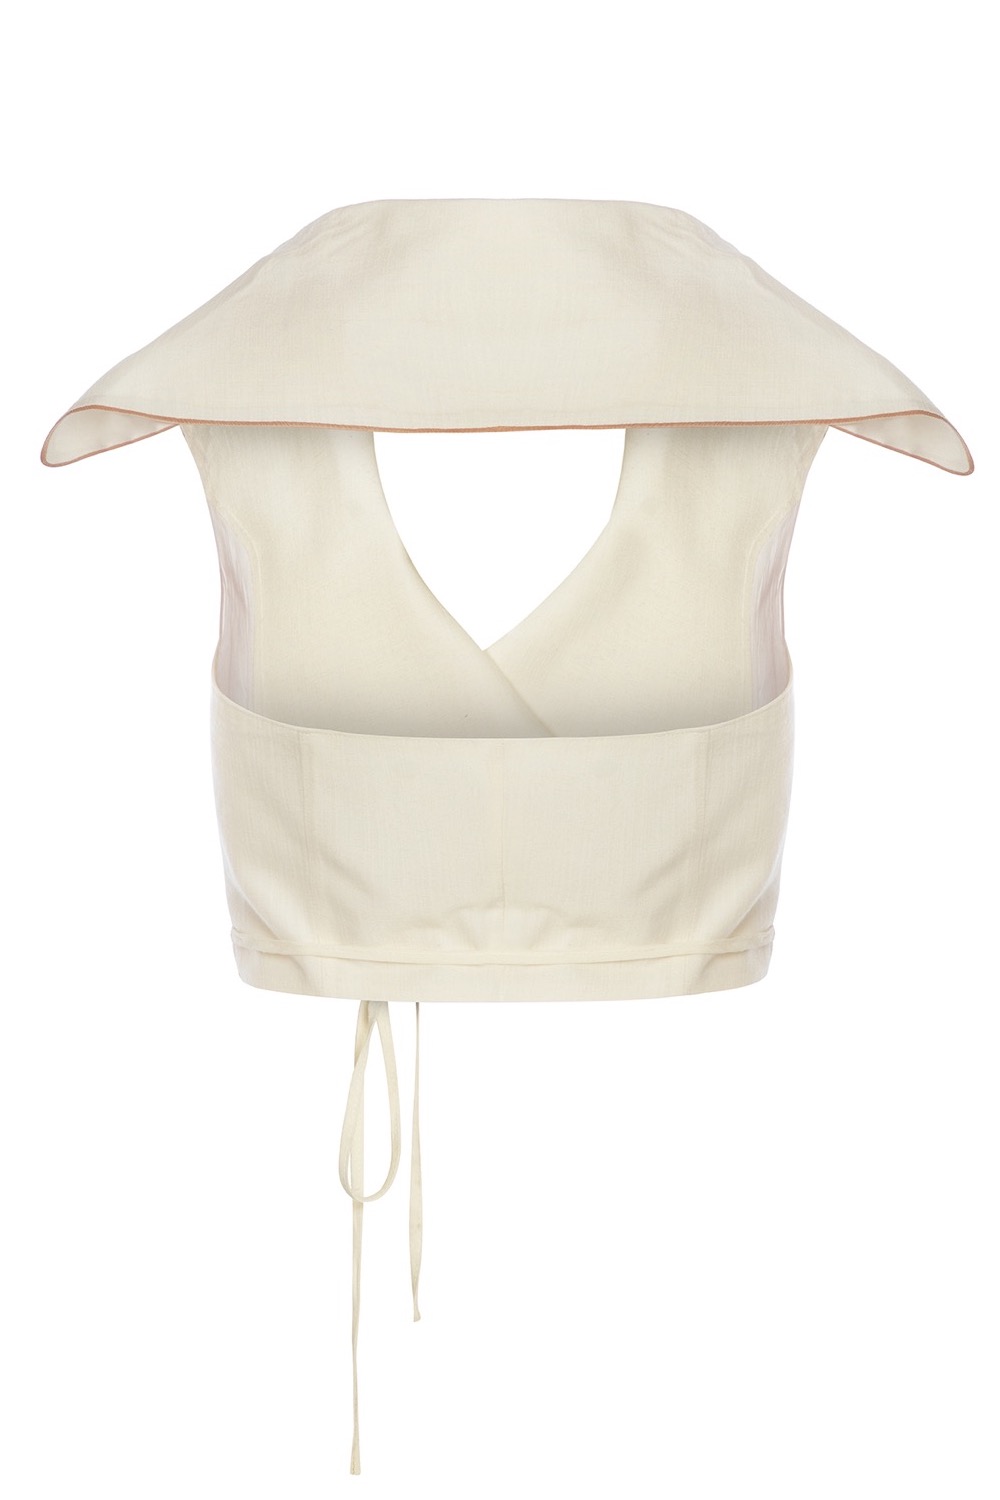 Marine Crop Top White Linen Double Breasted Shirt, Cut-out Detailed Top Bustier